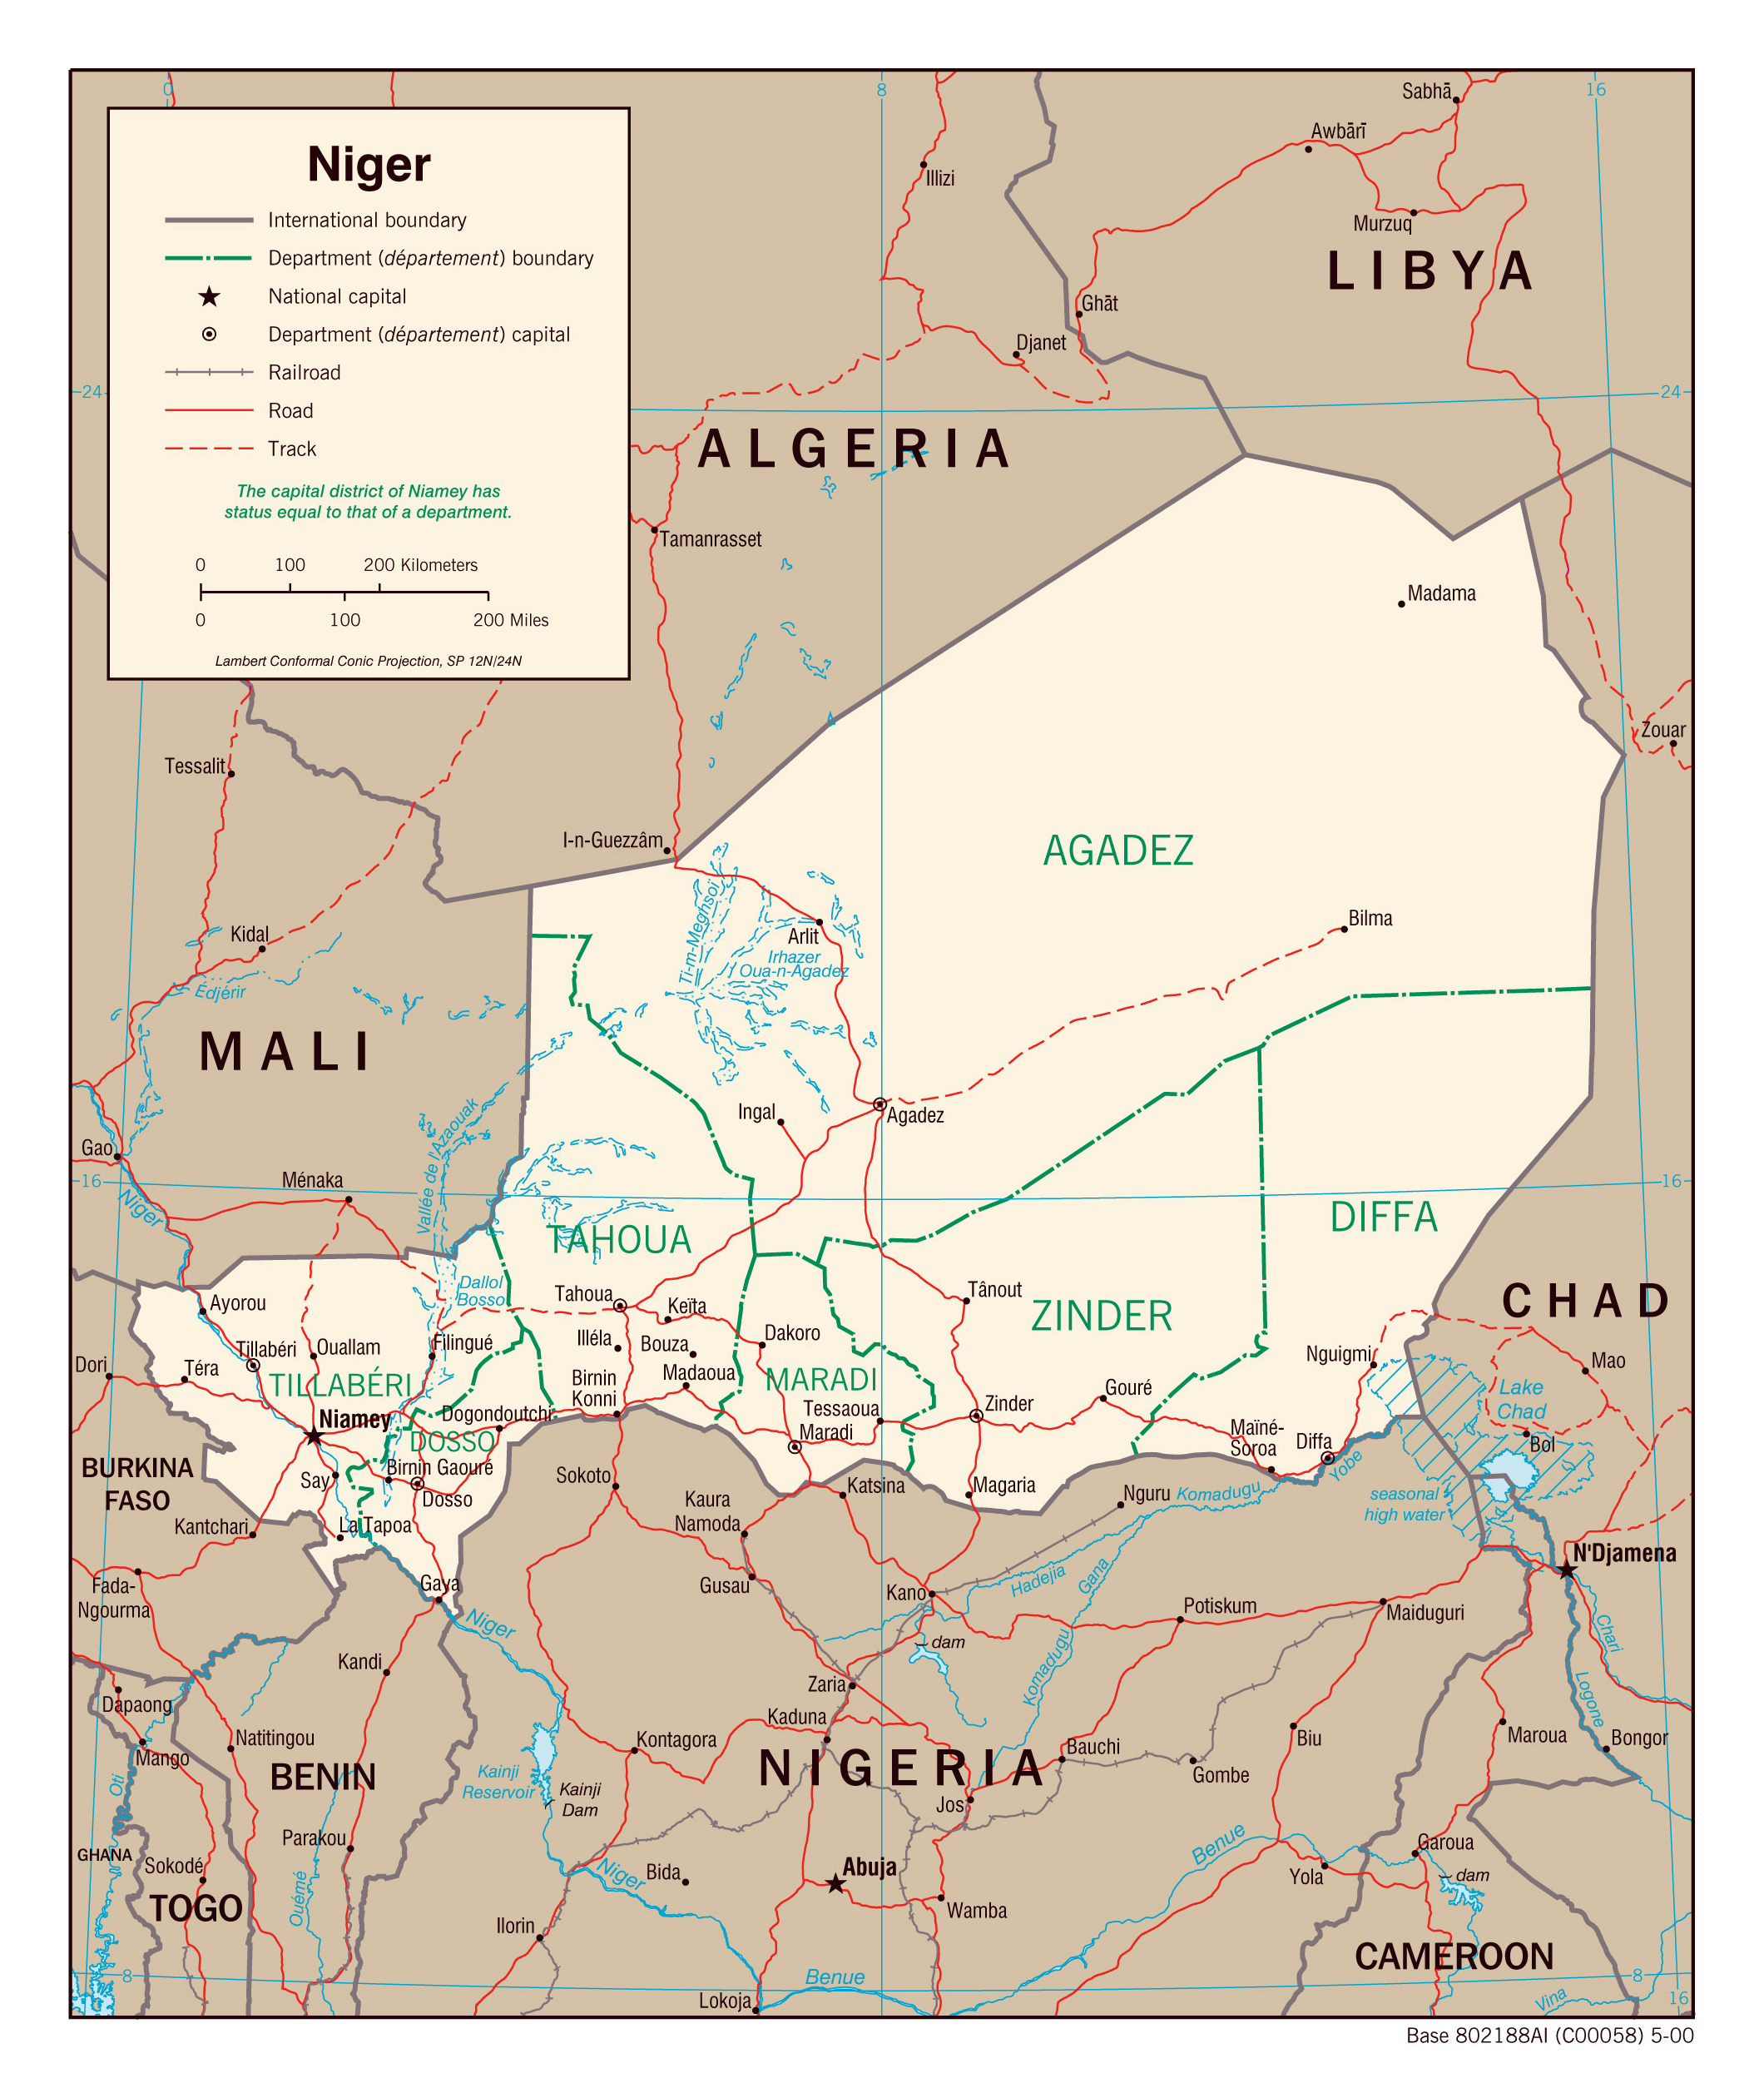 Large Detailed Political And Administrative Map Of Niger With Roads Railroads And Major Cities 2000 